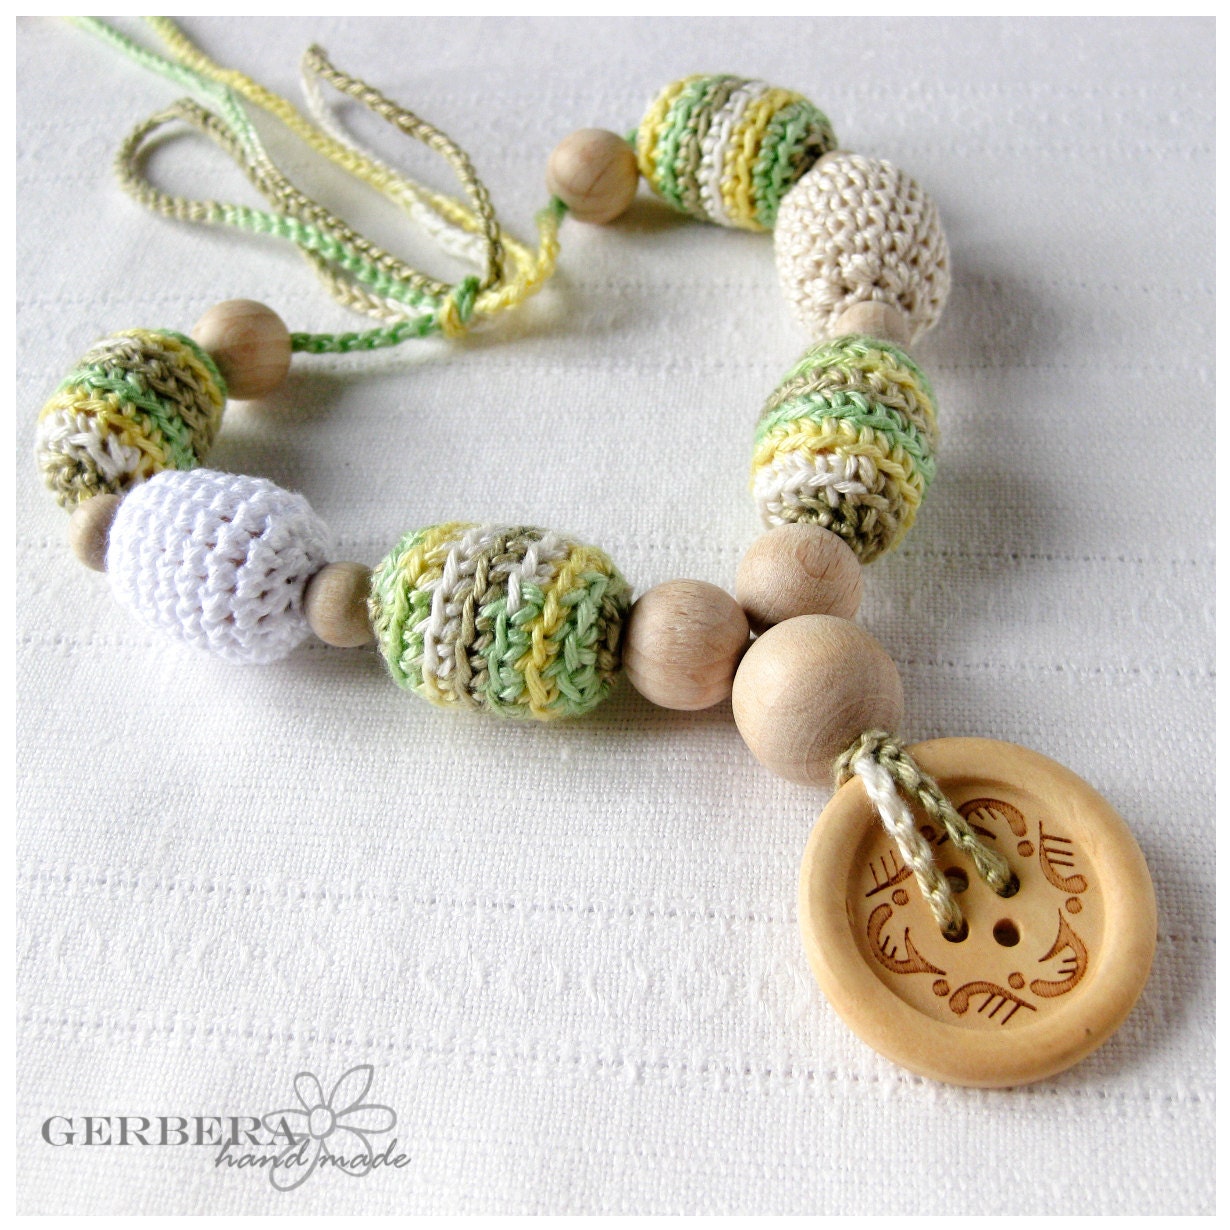 Nursing necklace/ Teething necklace for Mom to Wear and baby - soft green yellow white colors 100% cotton wood beads - RainbowGerbera